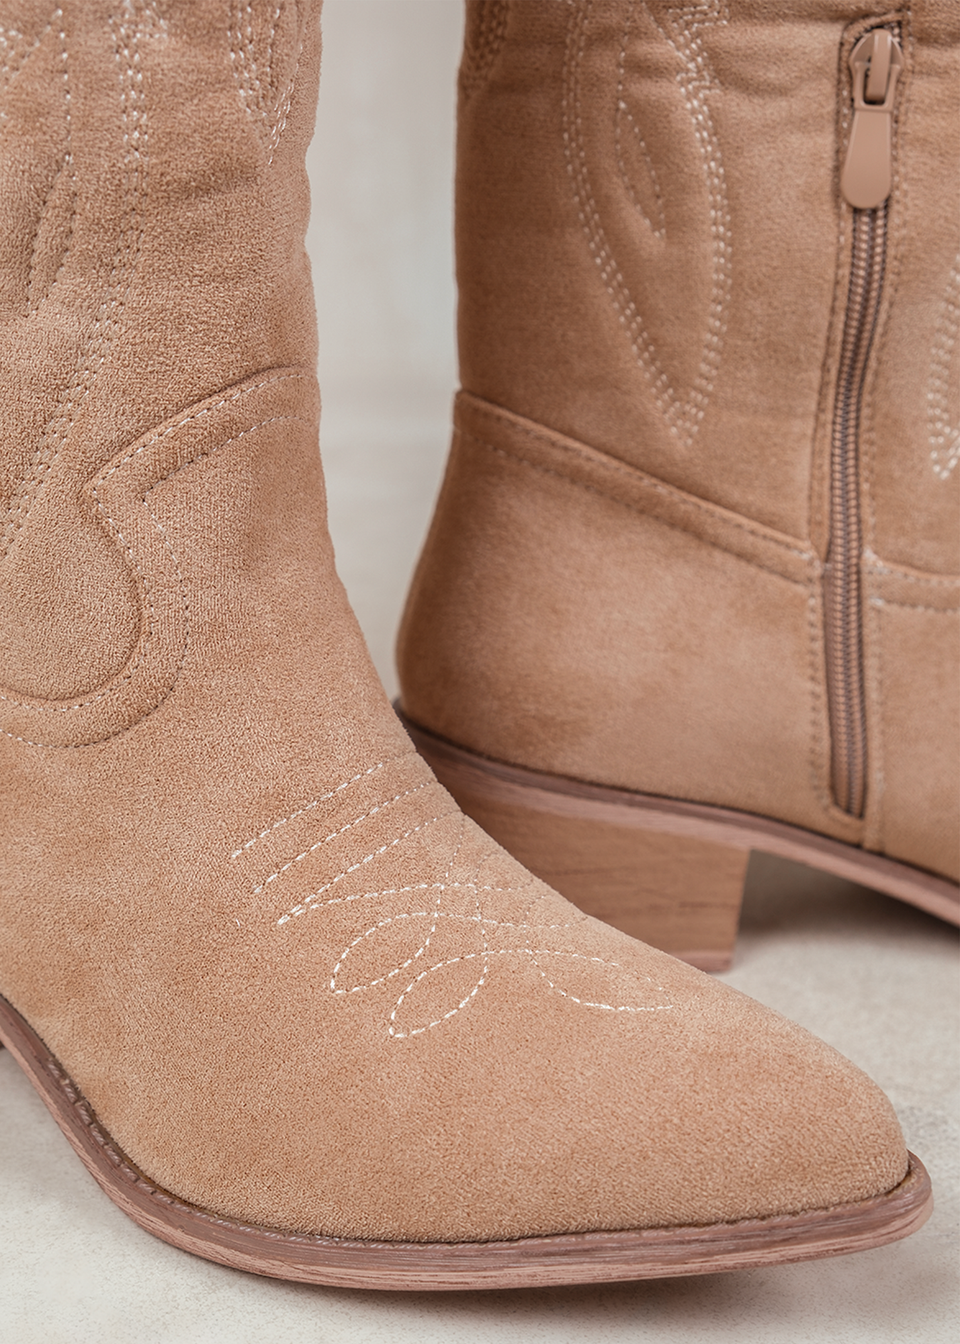 Where's That From Cream Suede Desert Cowboy Boots With Embroidery